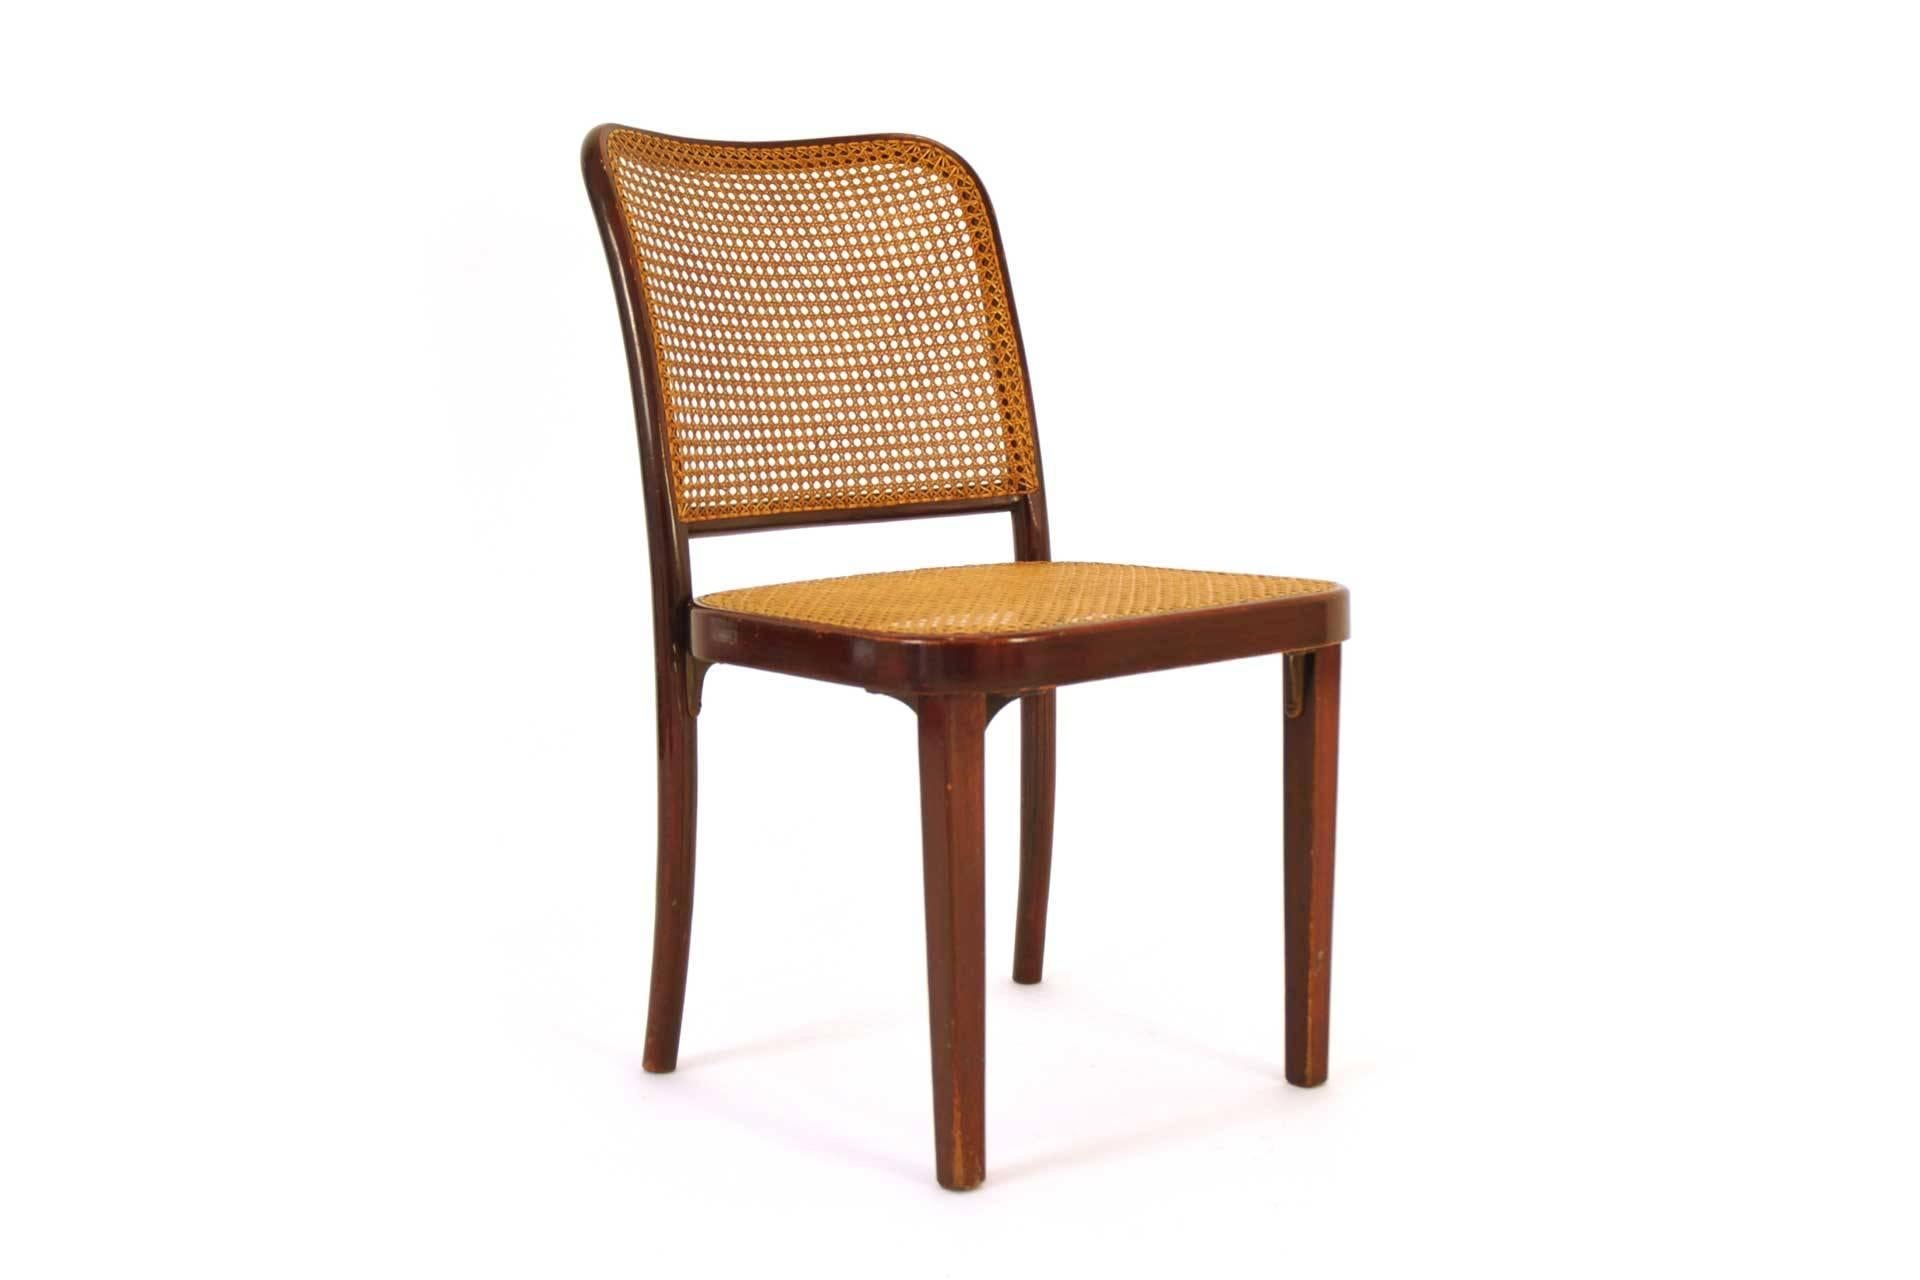 This piece was designed by Gustav Adolf Schneck or Josef Hoffmann in 1920s in Austria. The chairs are made of curved beech which is stained and polished. The seat and backrest are covered with network, which is probably renewed. Between seat and